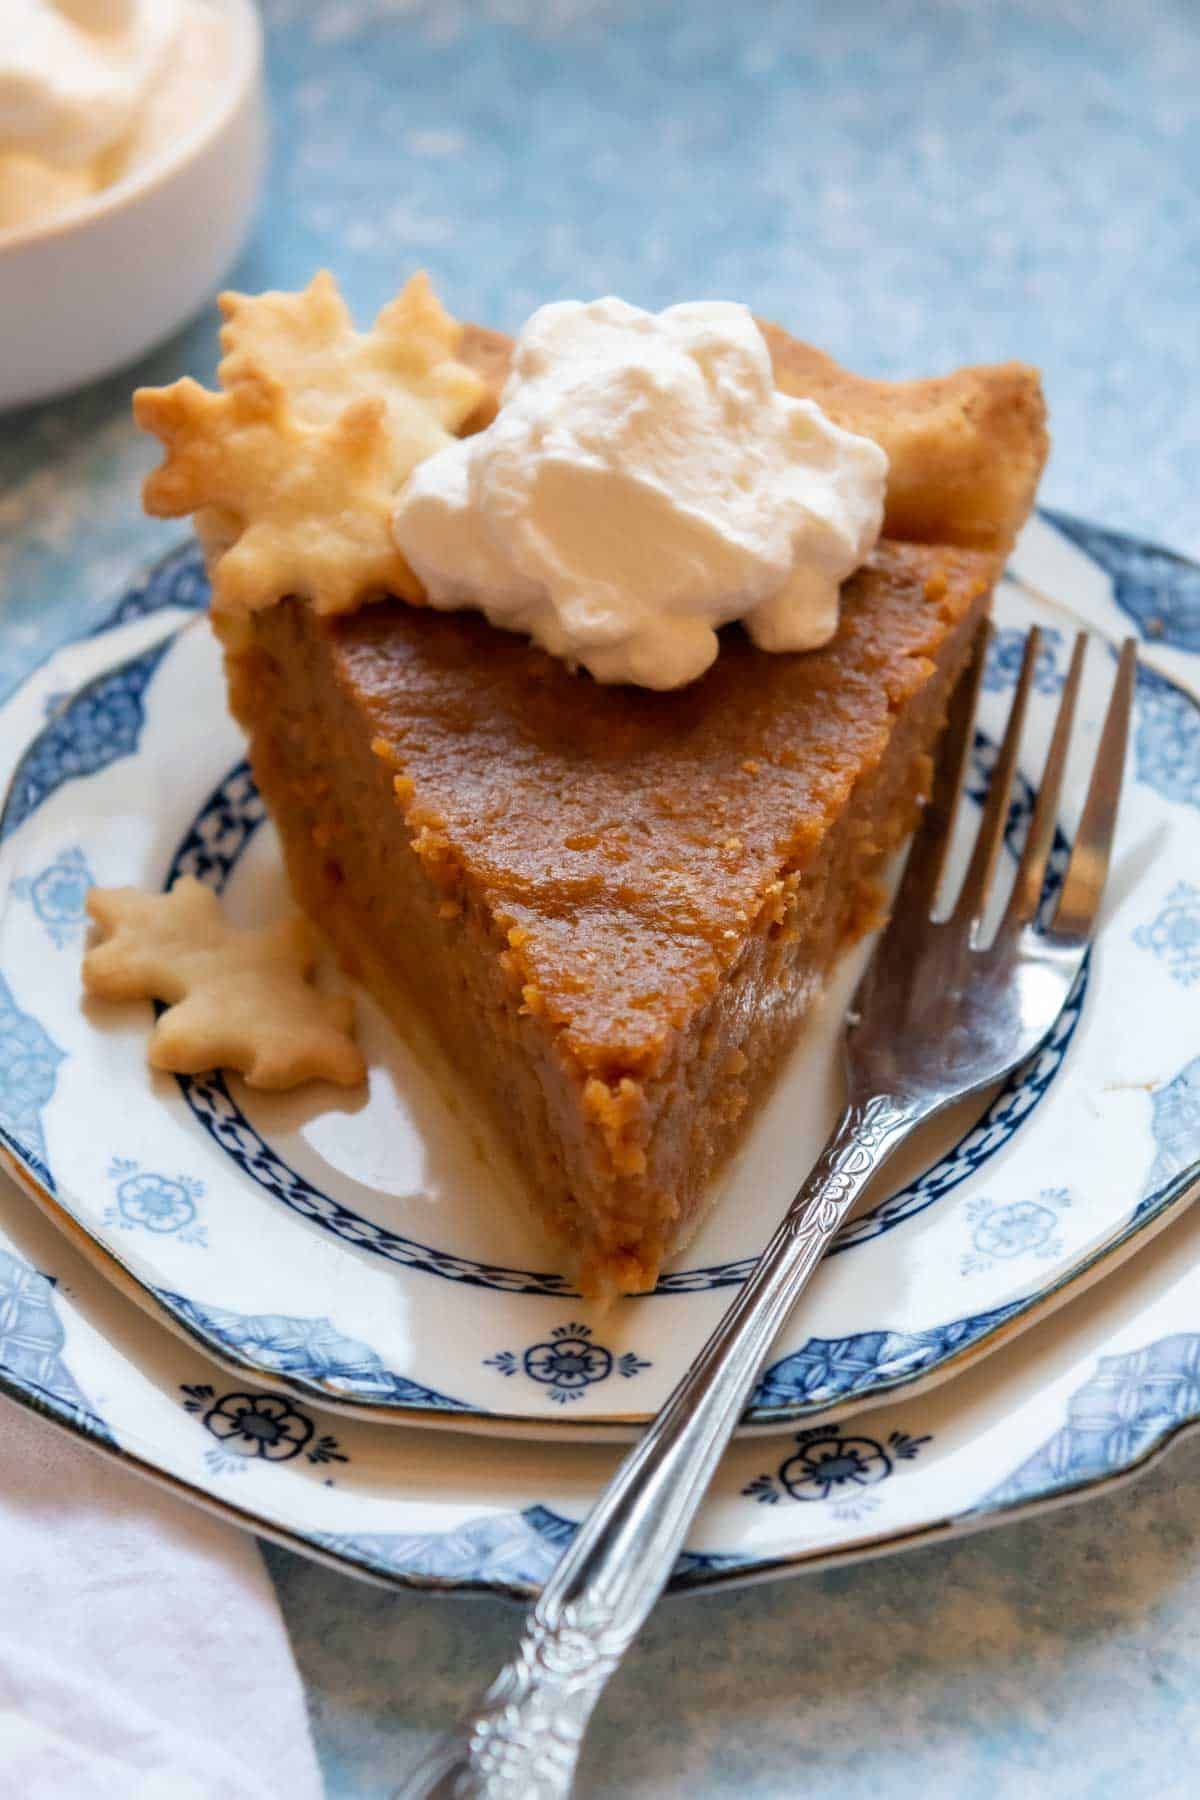 A piece of Gluten-Free Sweet Potato Pie on a small plate with a fork.